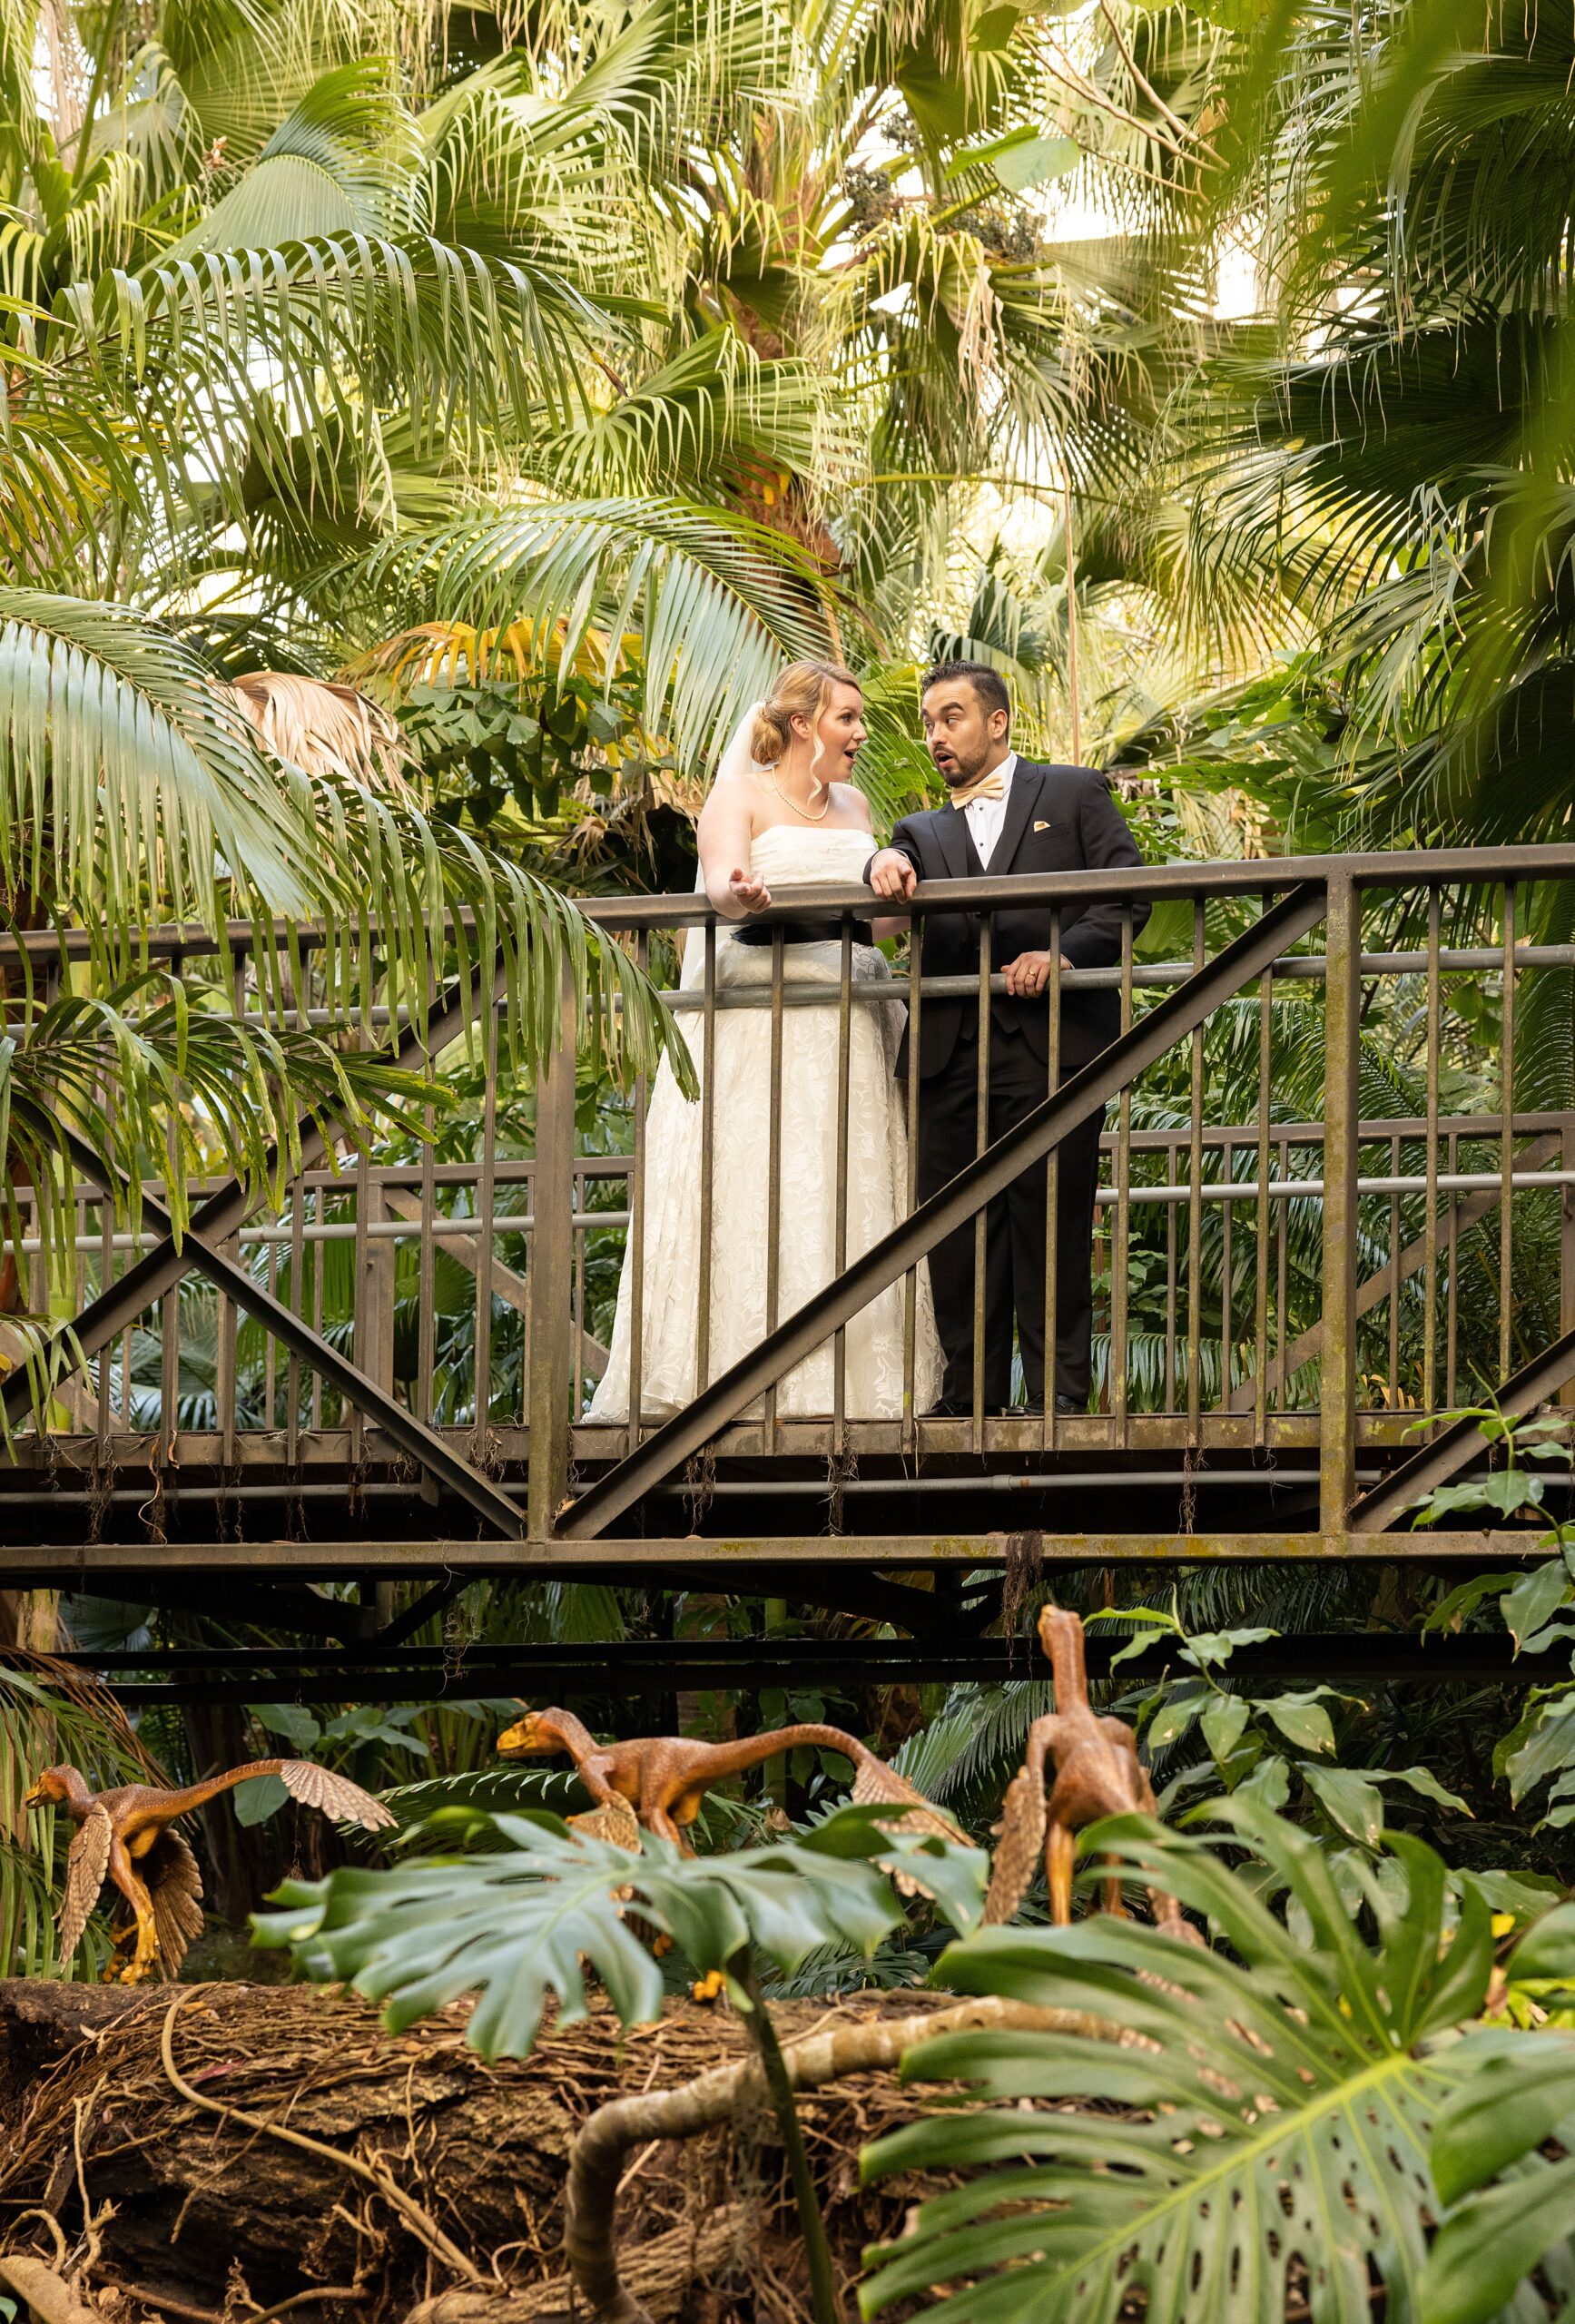 Newlyweds make special faces while standing on a bridge overlooking some dinosaurs running beneath them at their leu gardens wedding